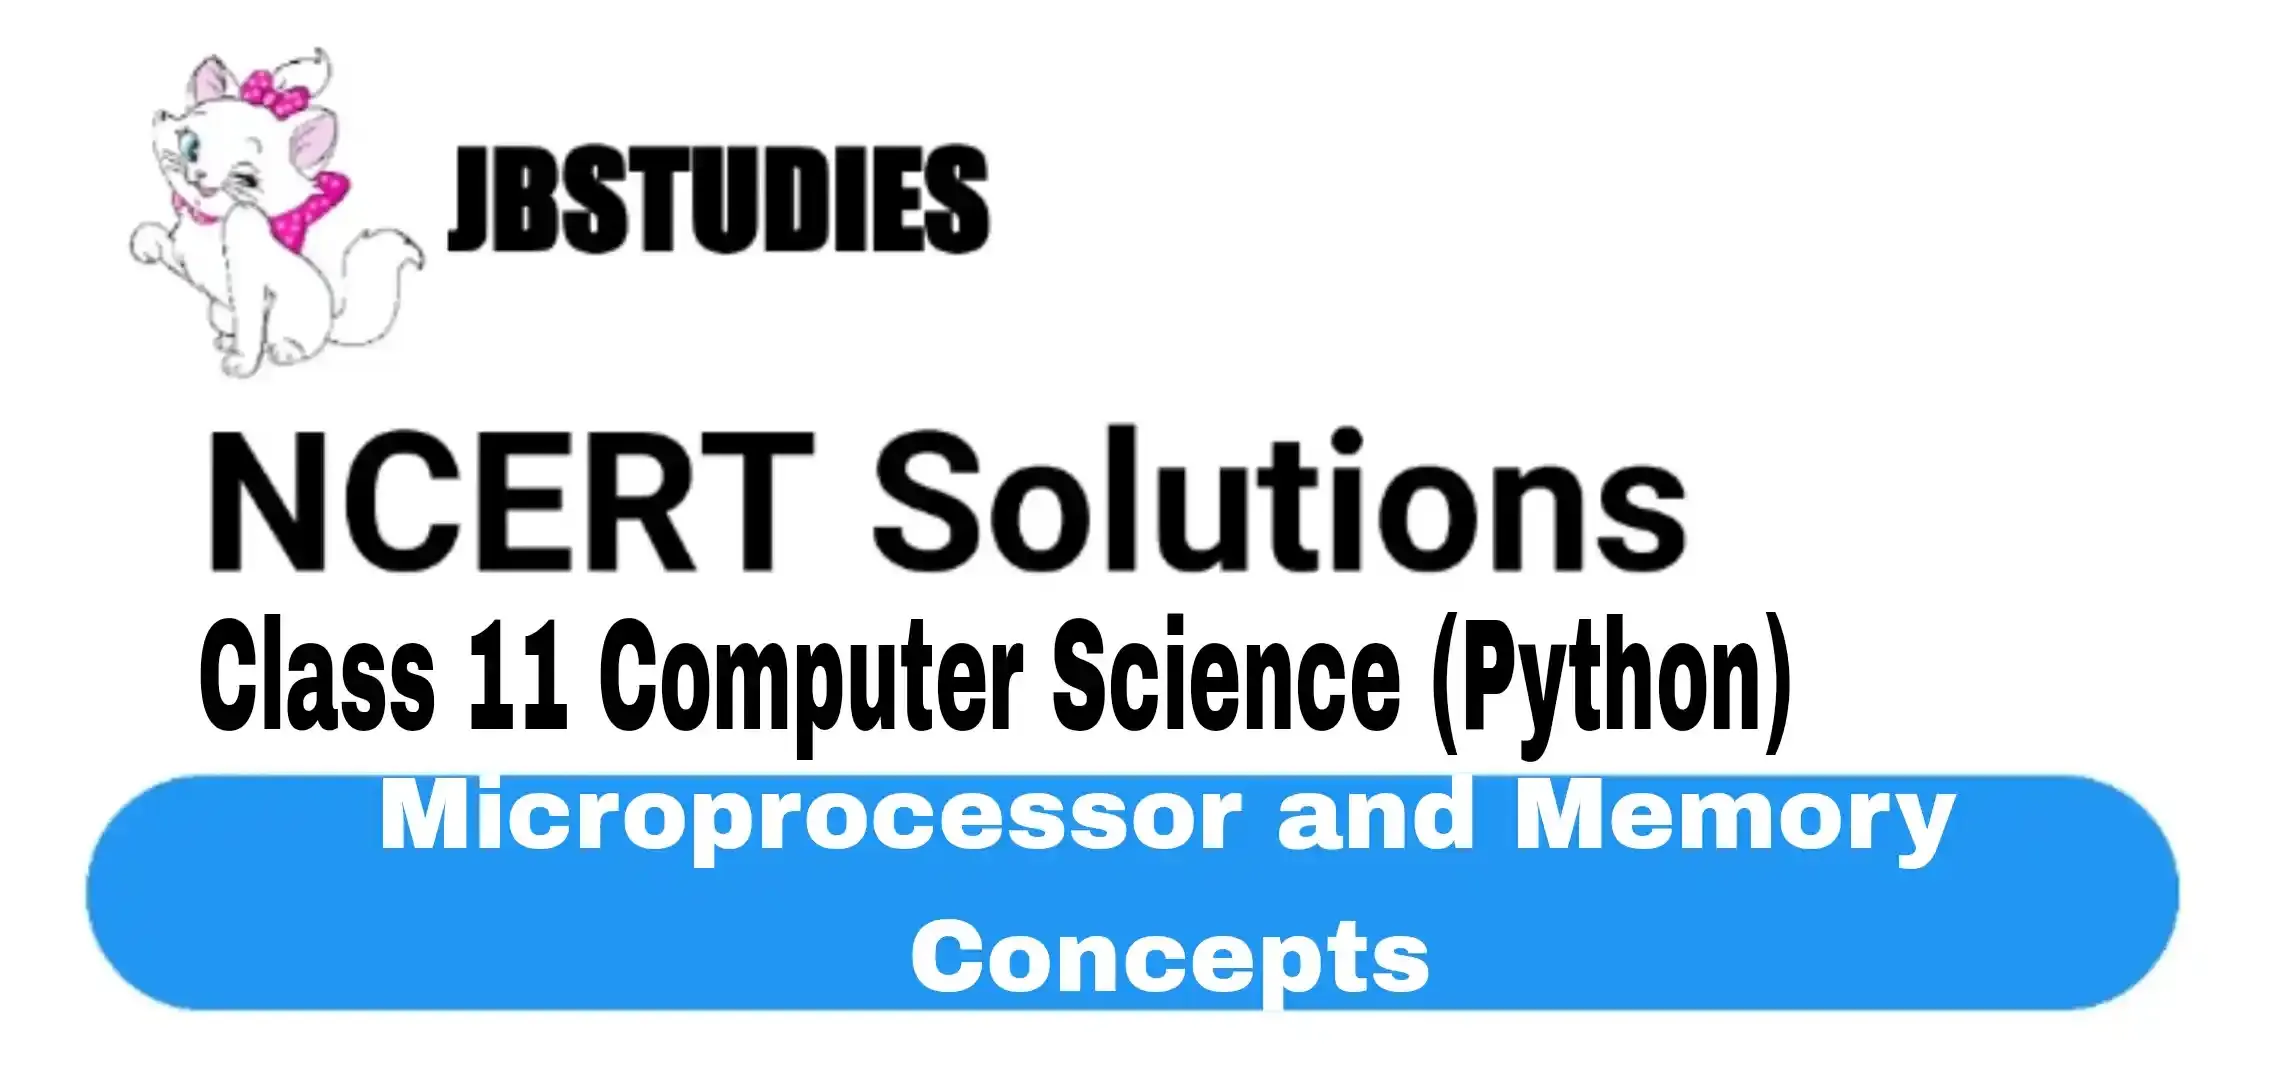 Solutions Class 11 Computer Science (Python) Chapter-4 (Microprocessor and Memory Concepts)